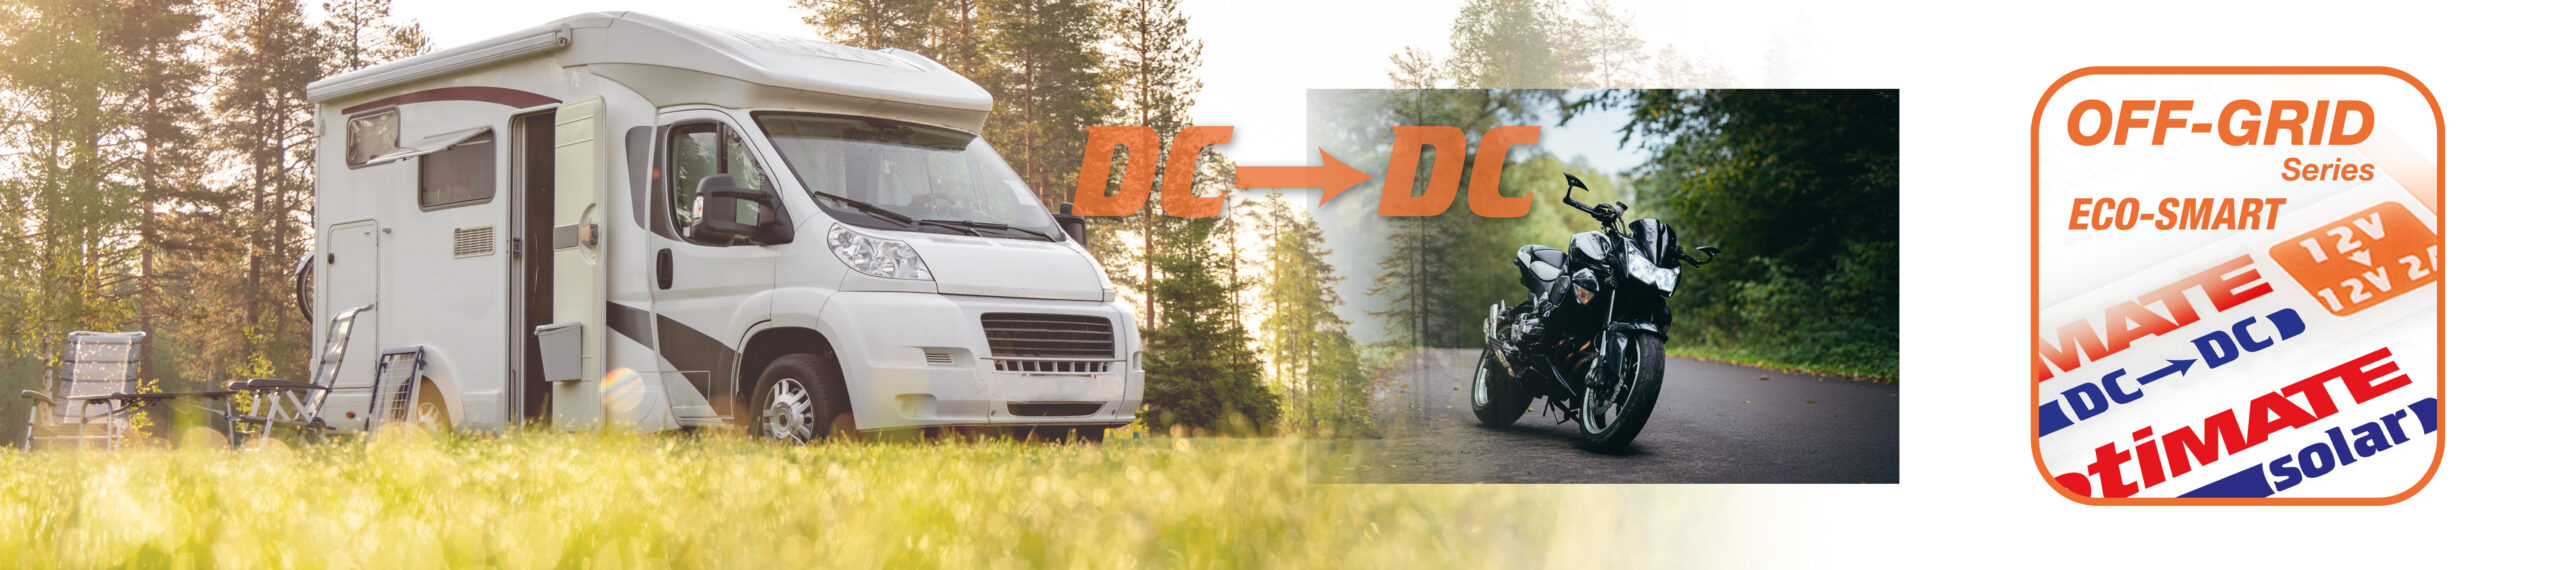 dc to dc charger to charge from vehicle (RV) to motorcycle